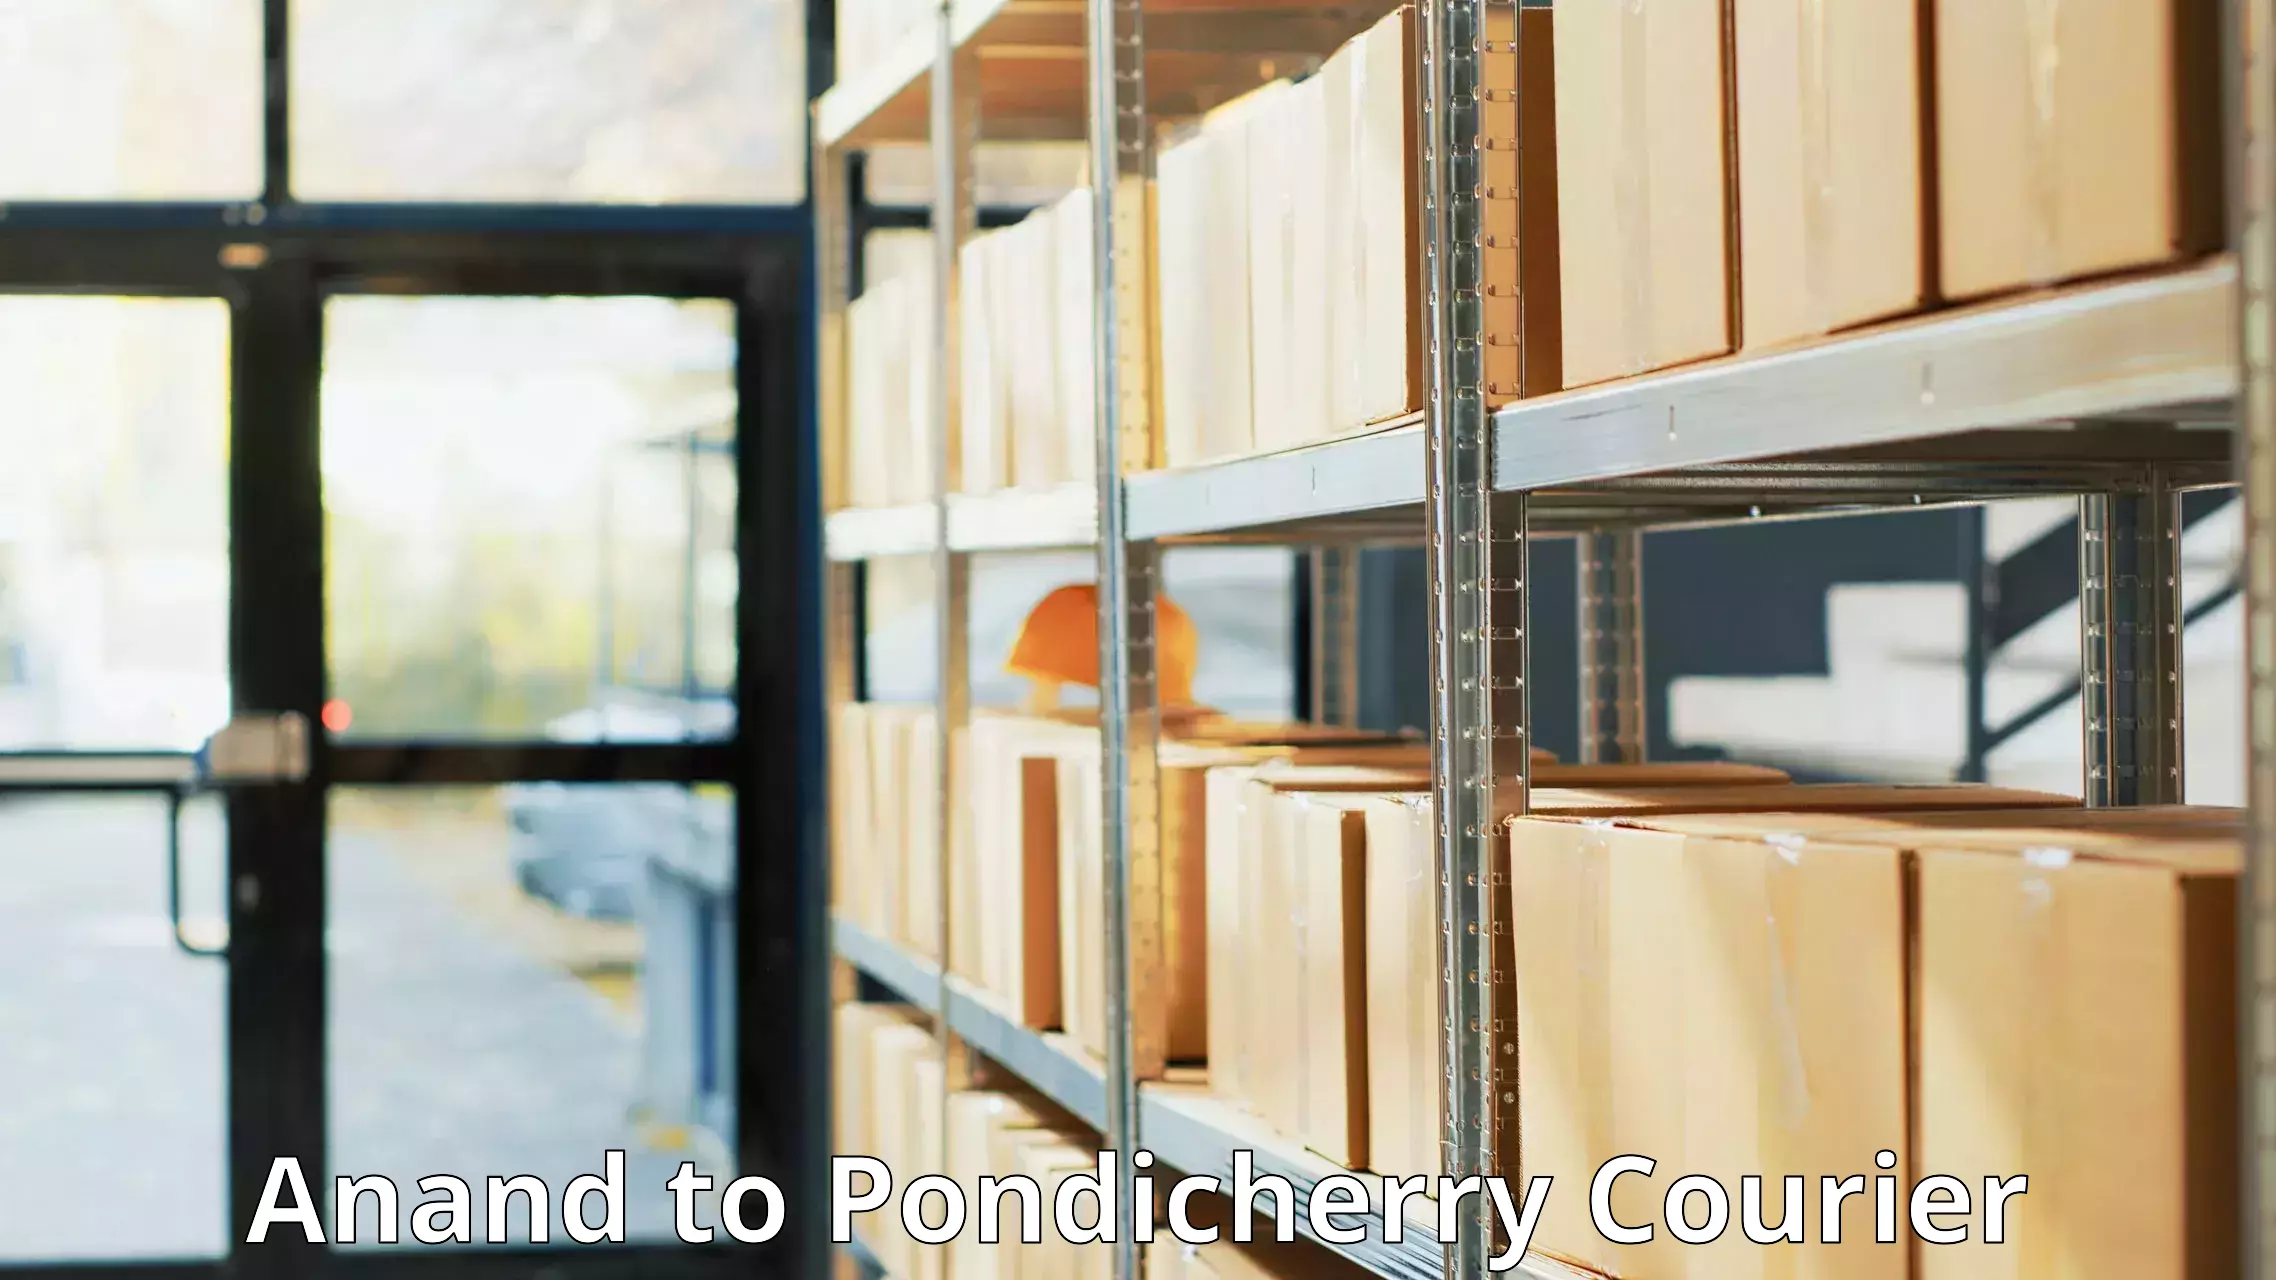 Courier service innovation Anand to Pondicherry University